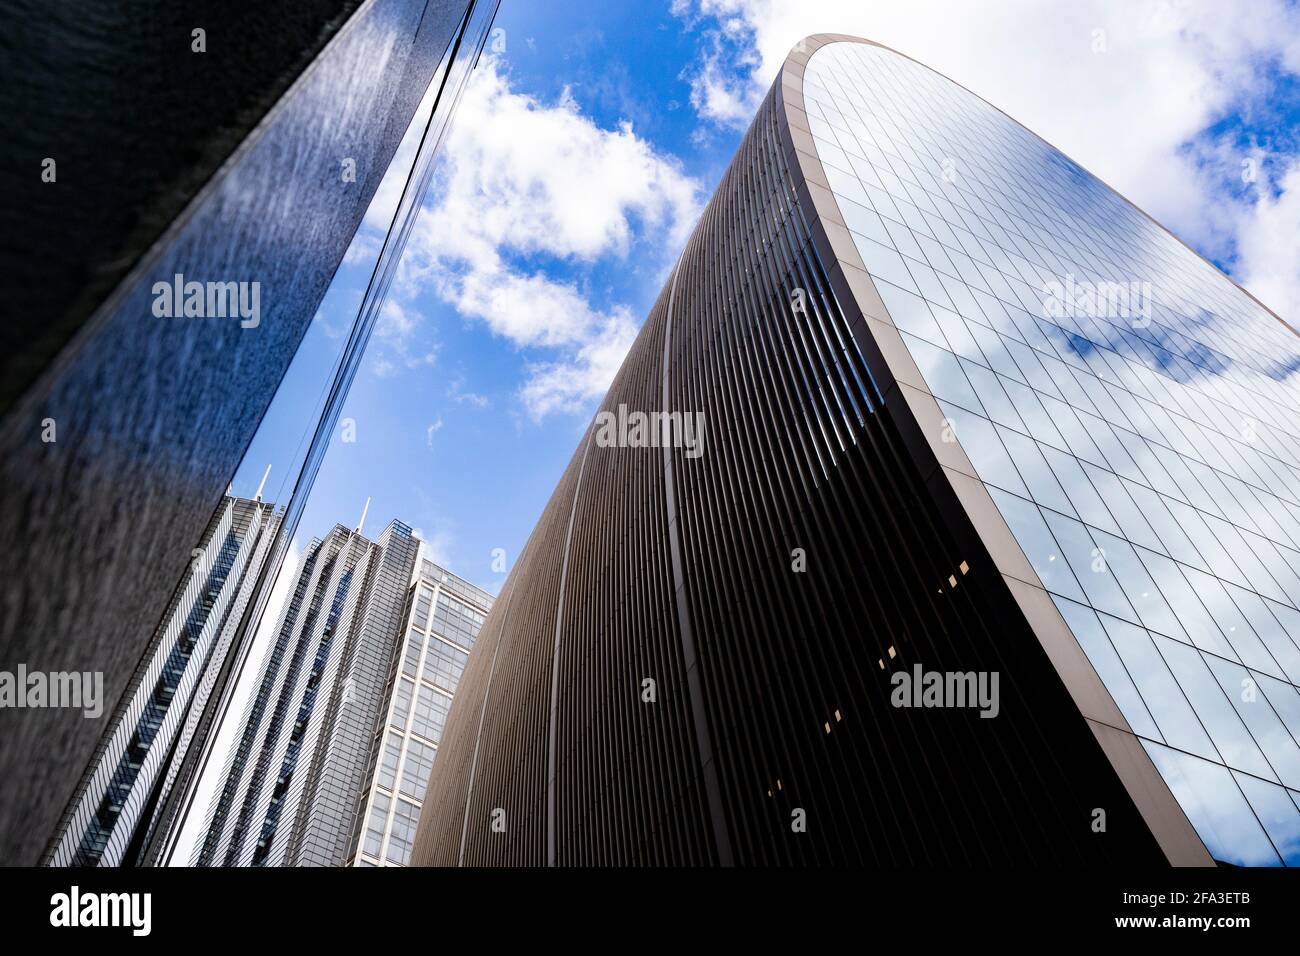 70 St Mary Axe or Can of Ham building in London Stock Photo